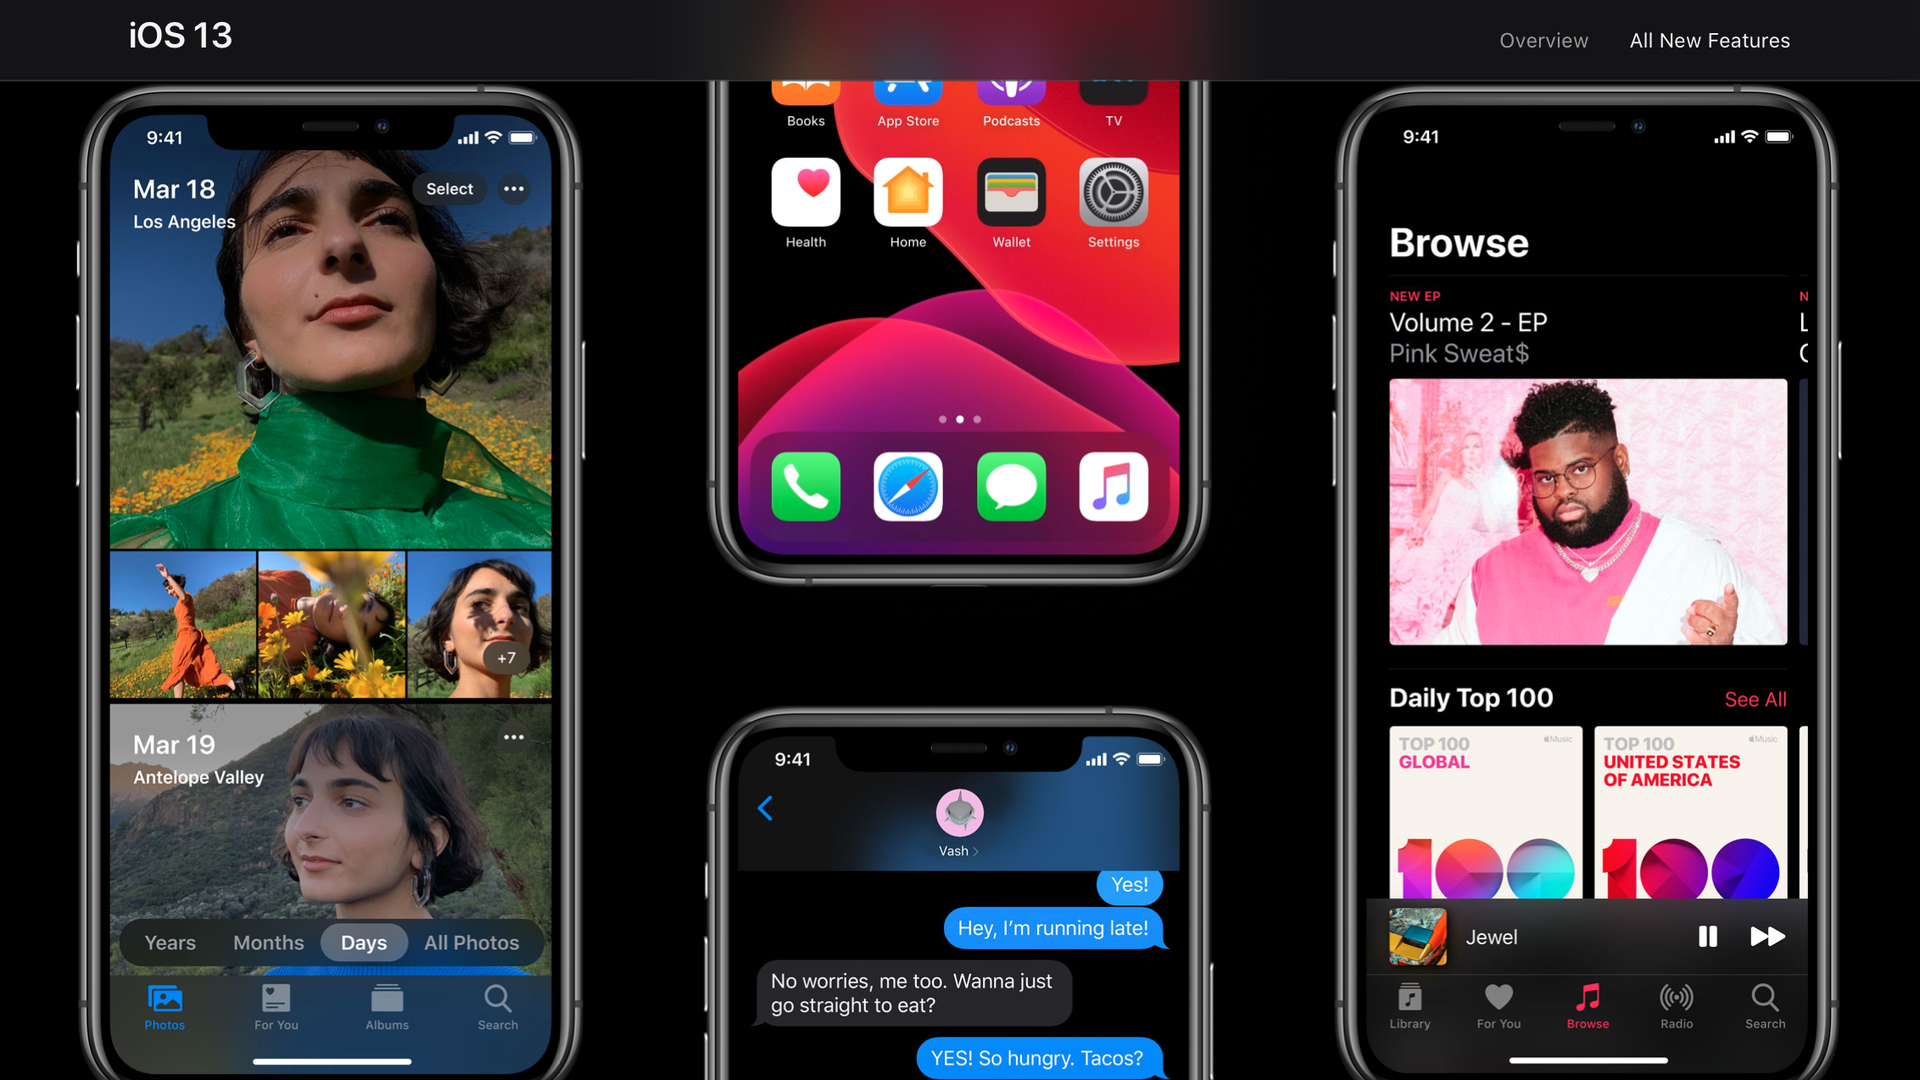 The iOS 13 page on Apple's Web site, showing dark mode, improved photo editing and other new features.